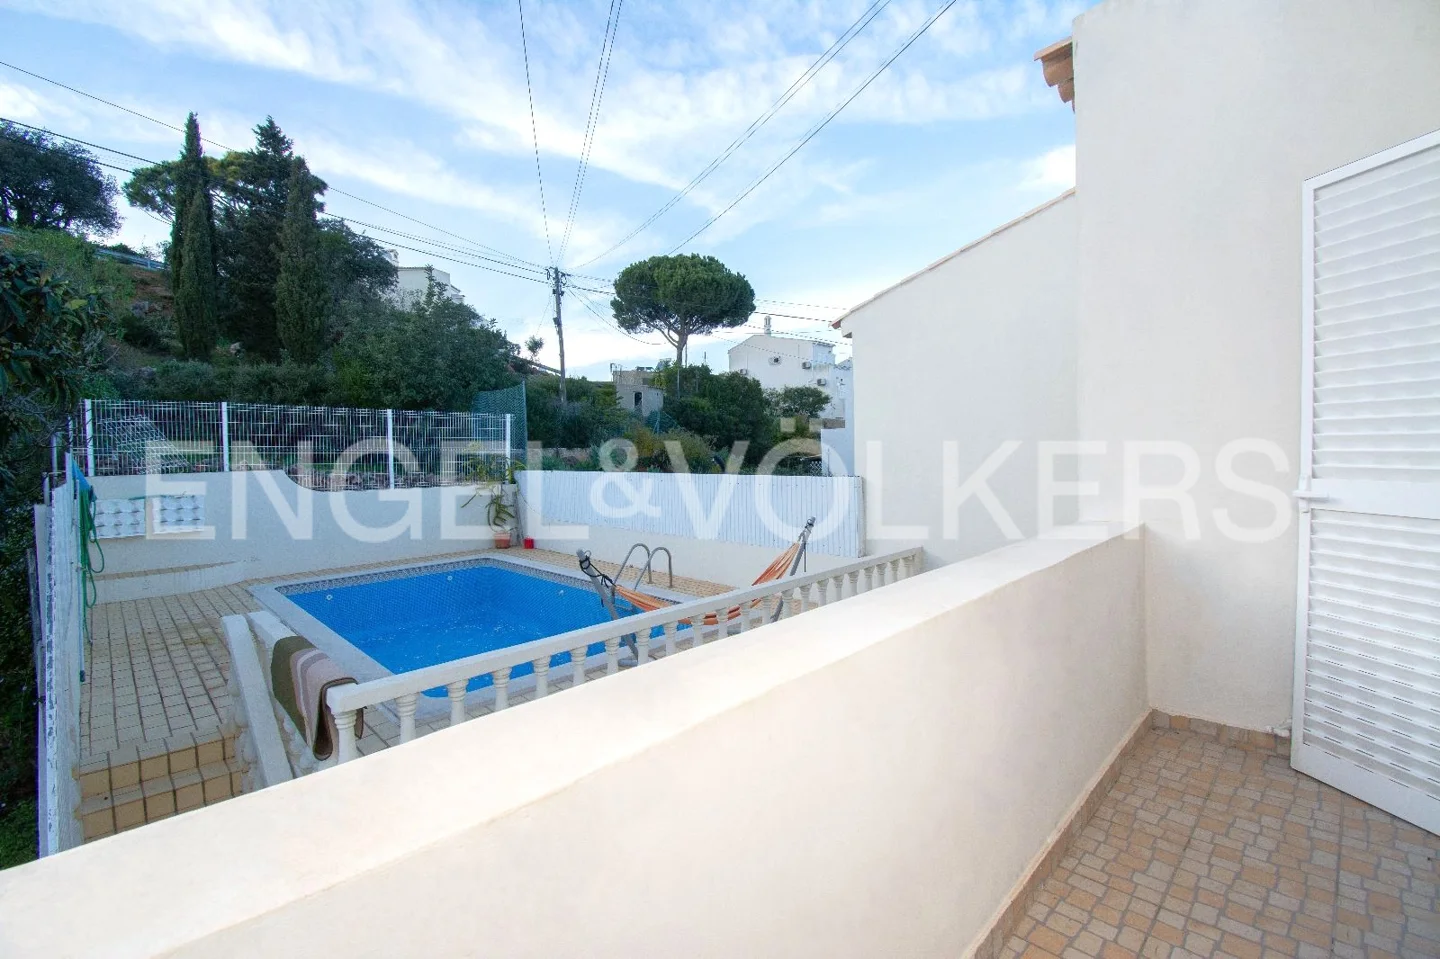 3 bedroom villa with pool and parking space in quiet area of Loulé